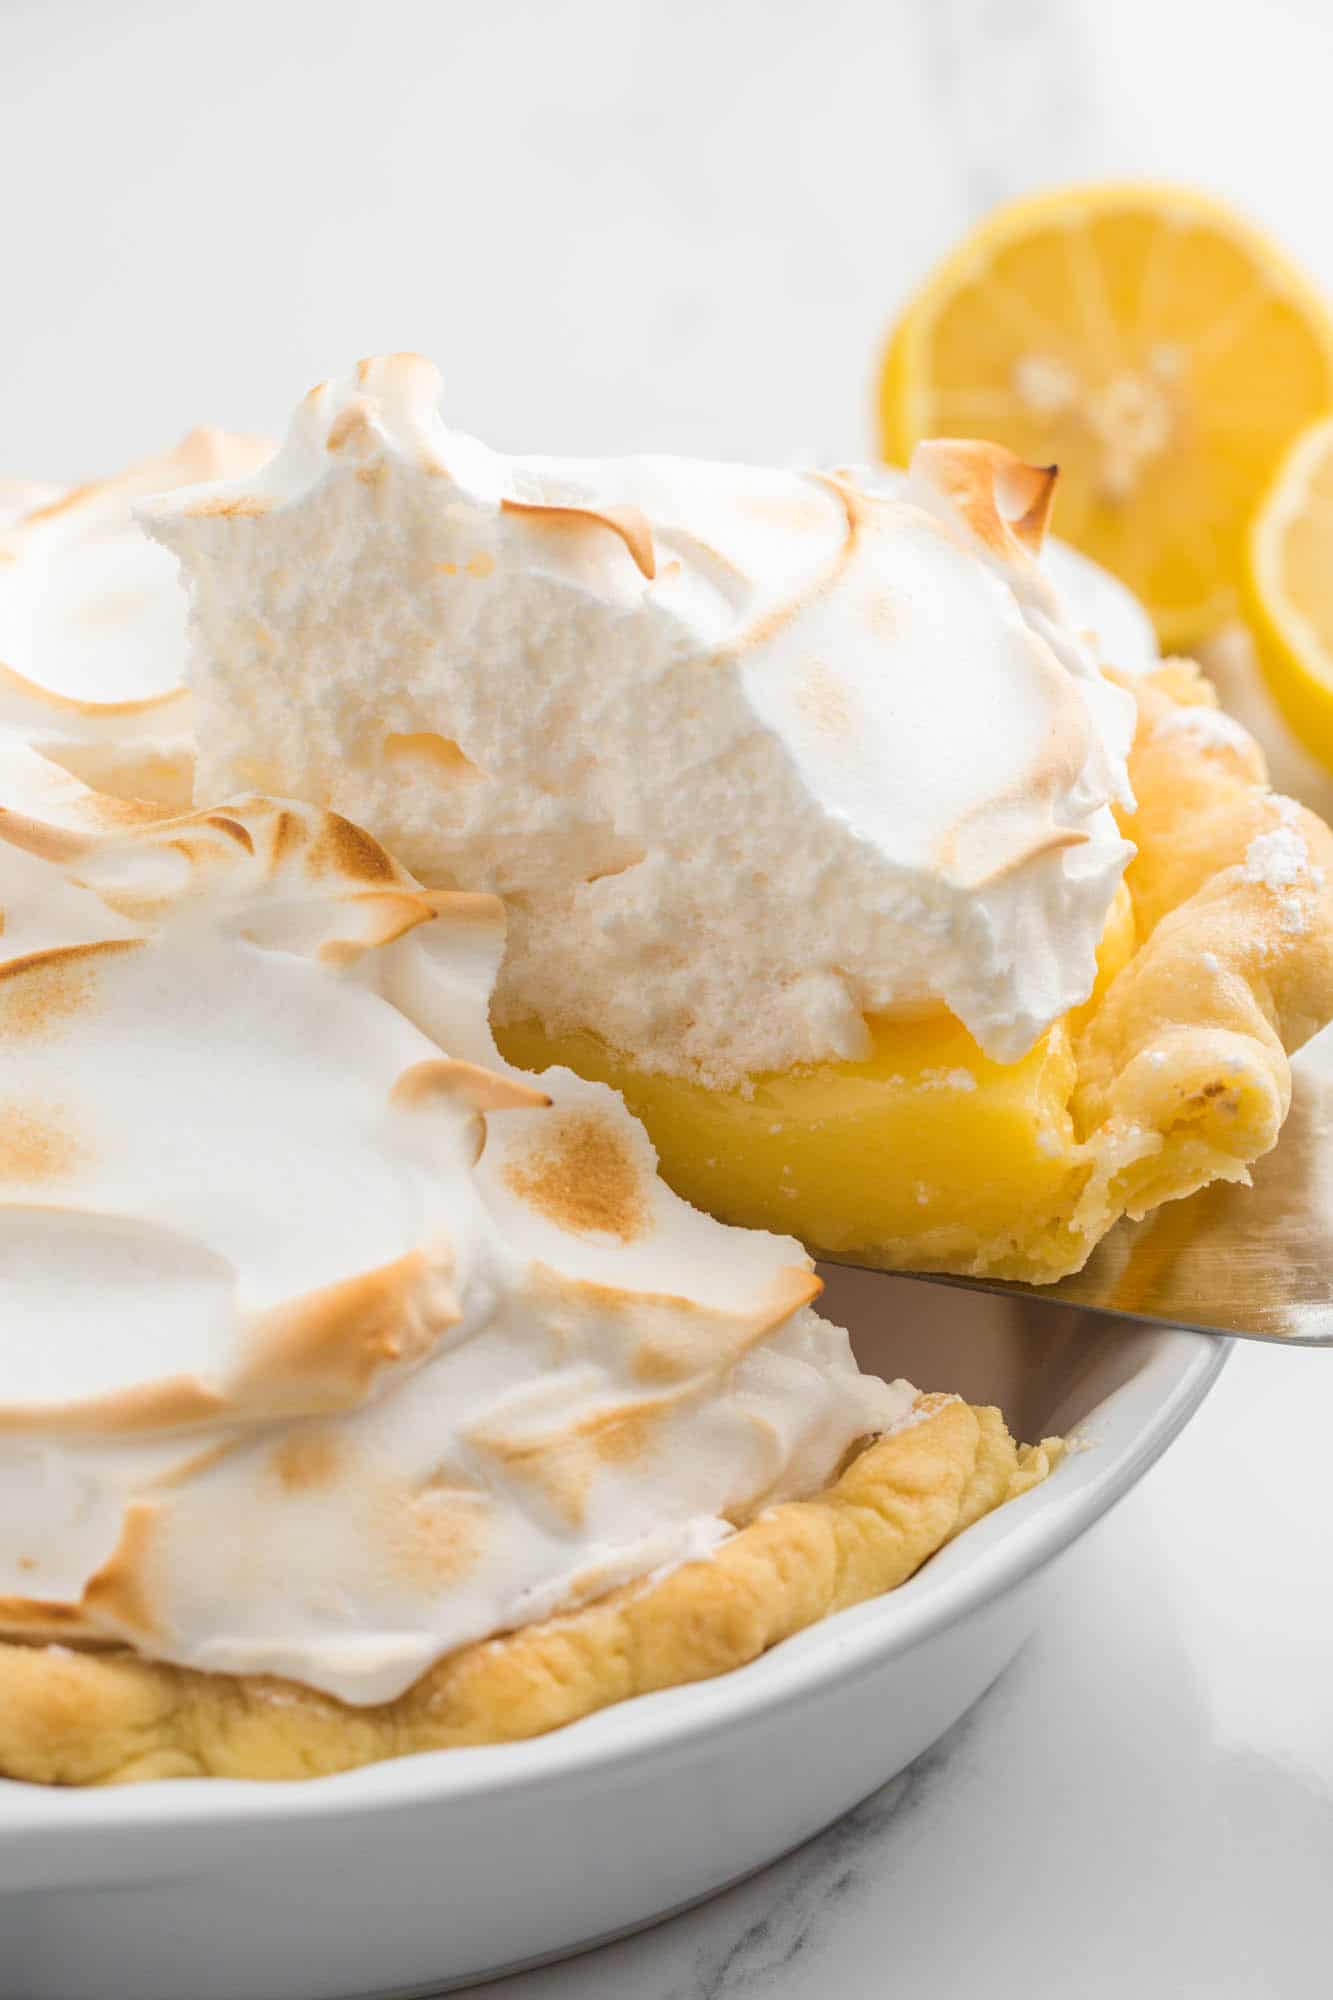 a homemade lemon pie with toasted meringue topping. A slice is being lifted out of the pan.